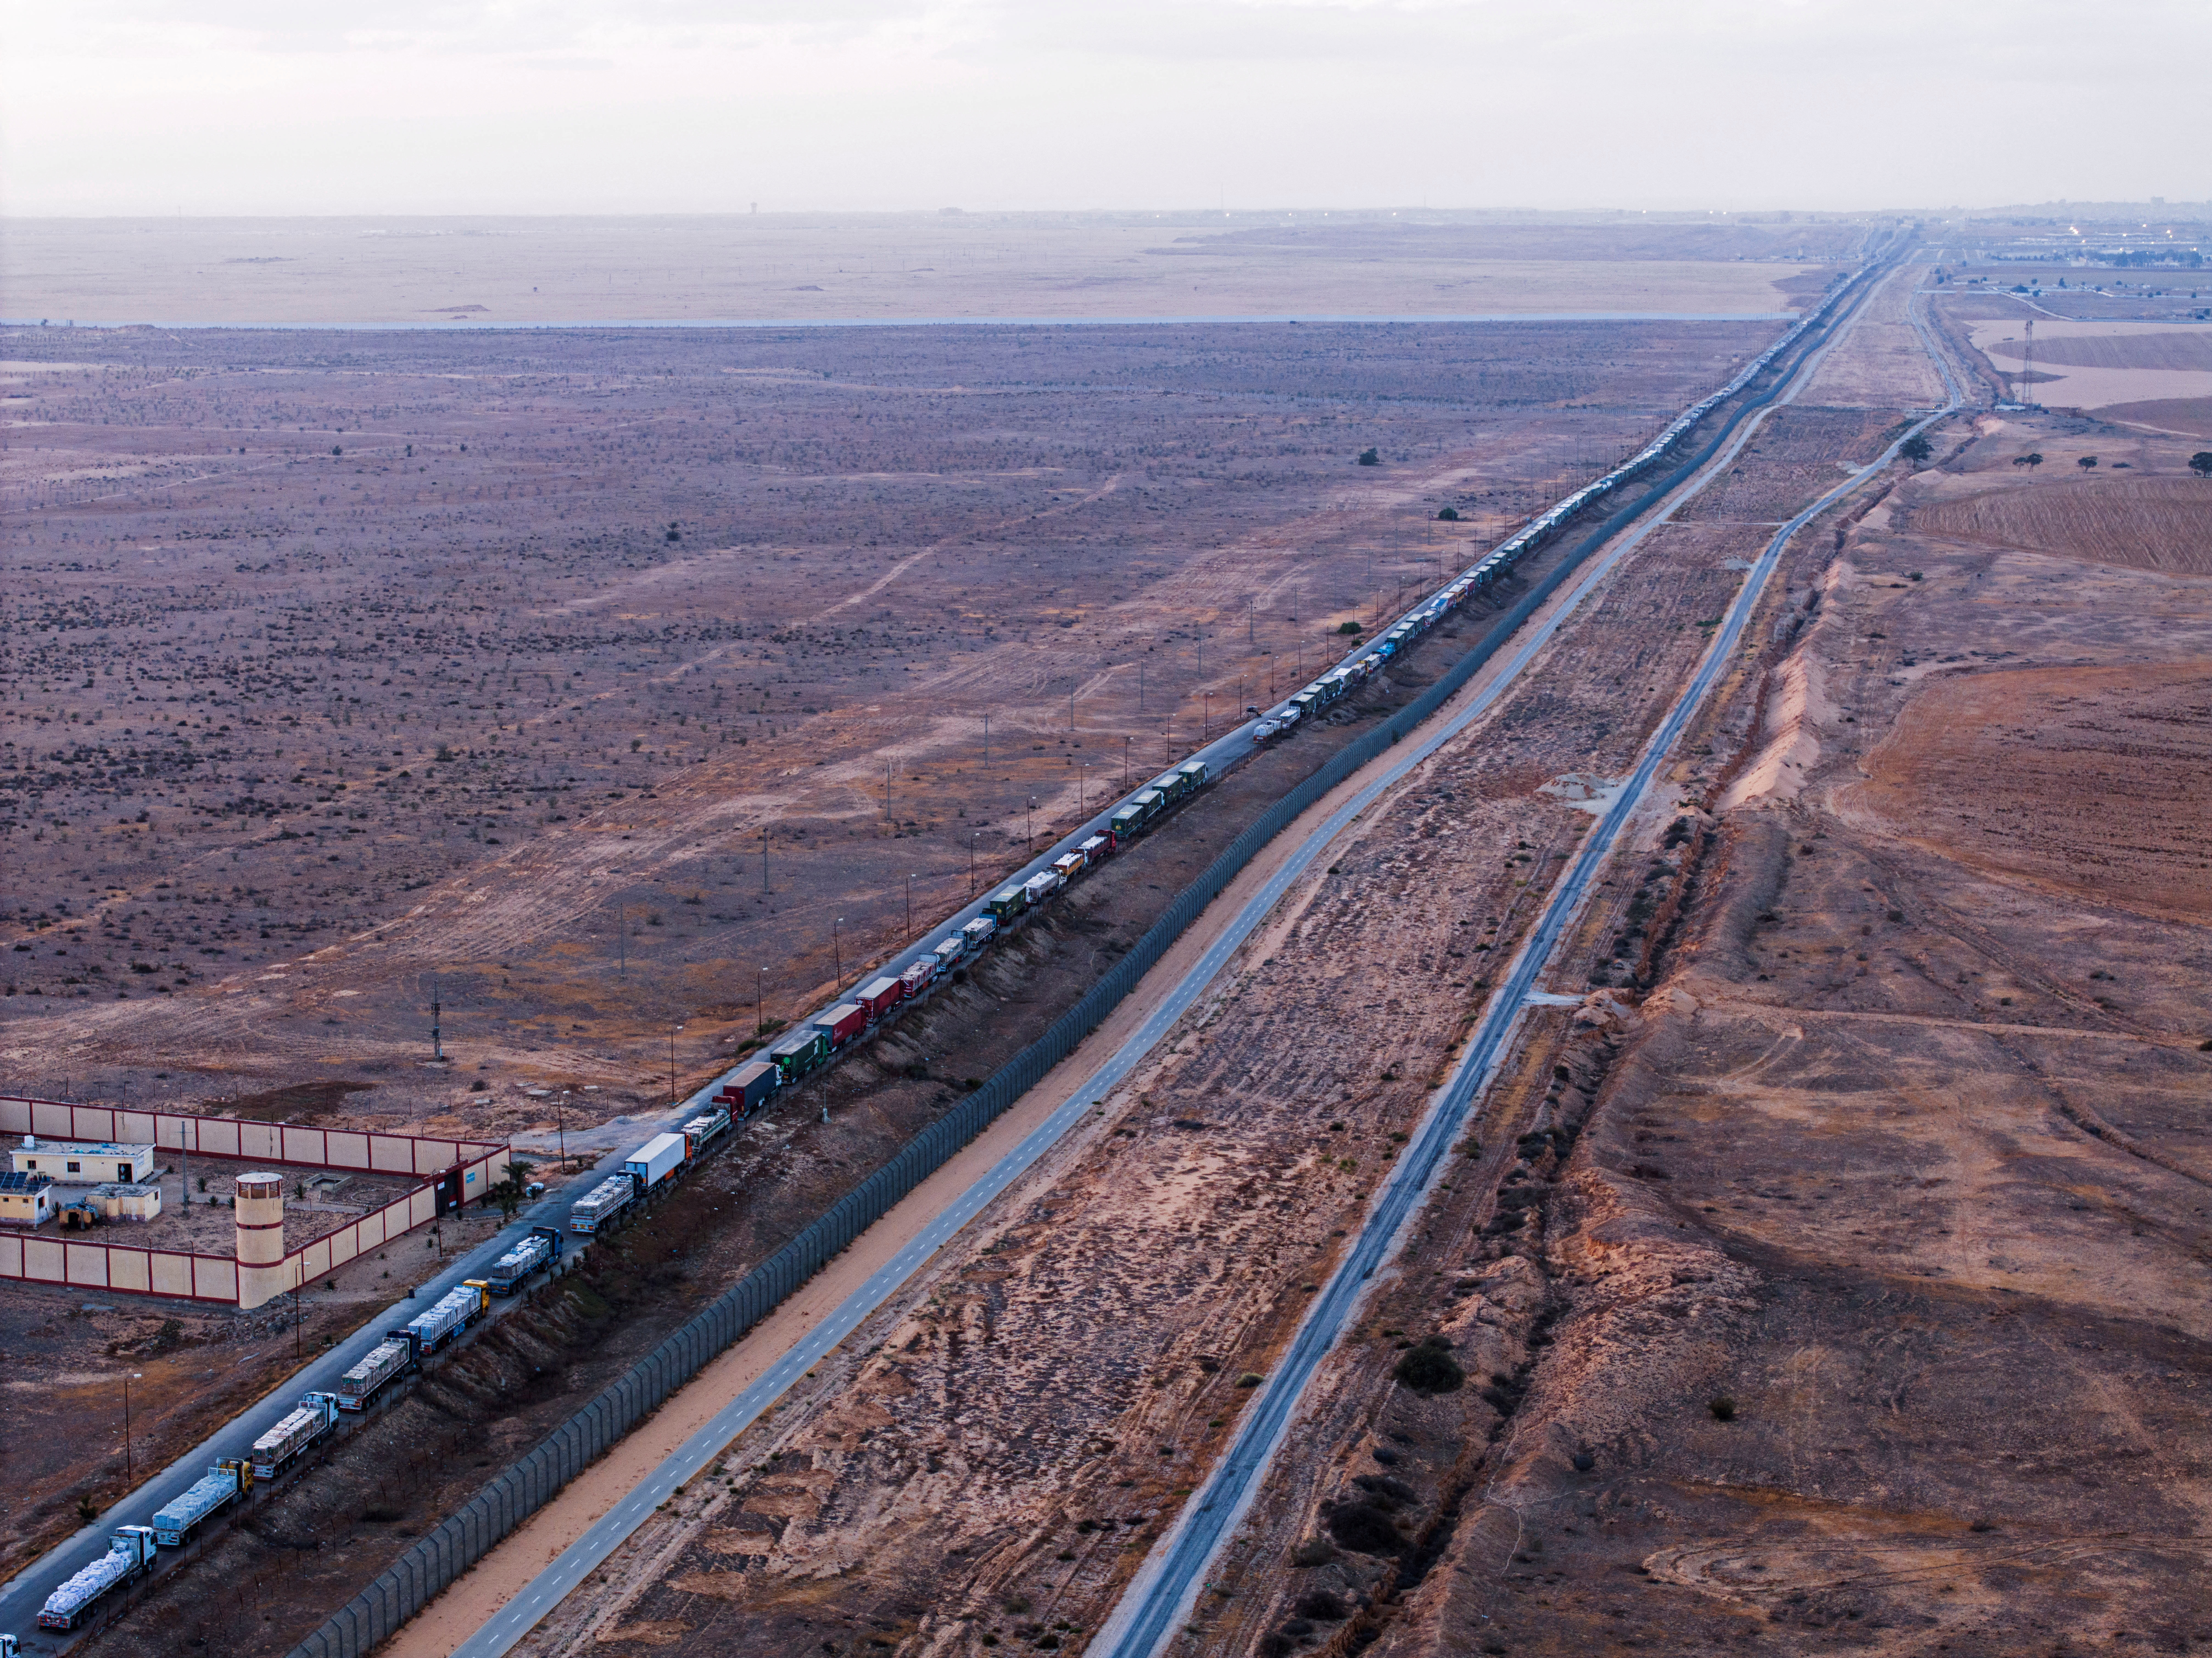 A drone picture of a line of trucks waiting on an Egyptian road along the border with Israel, near the Rafah border crossing with the Gaza Strip